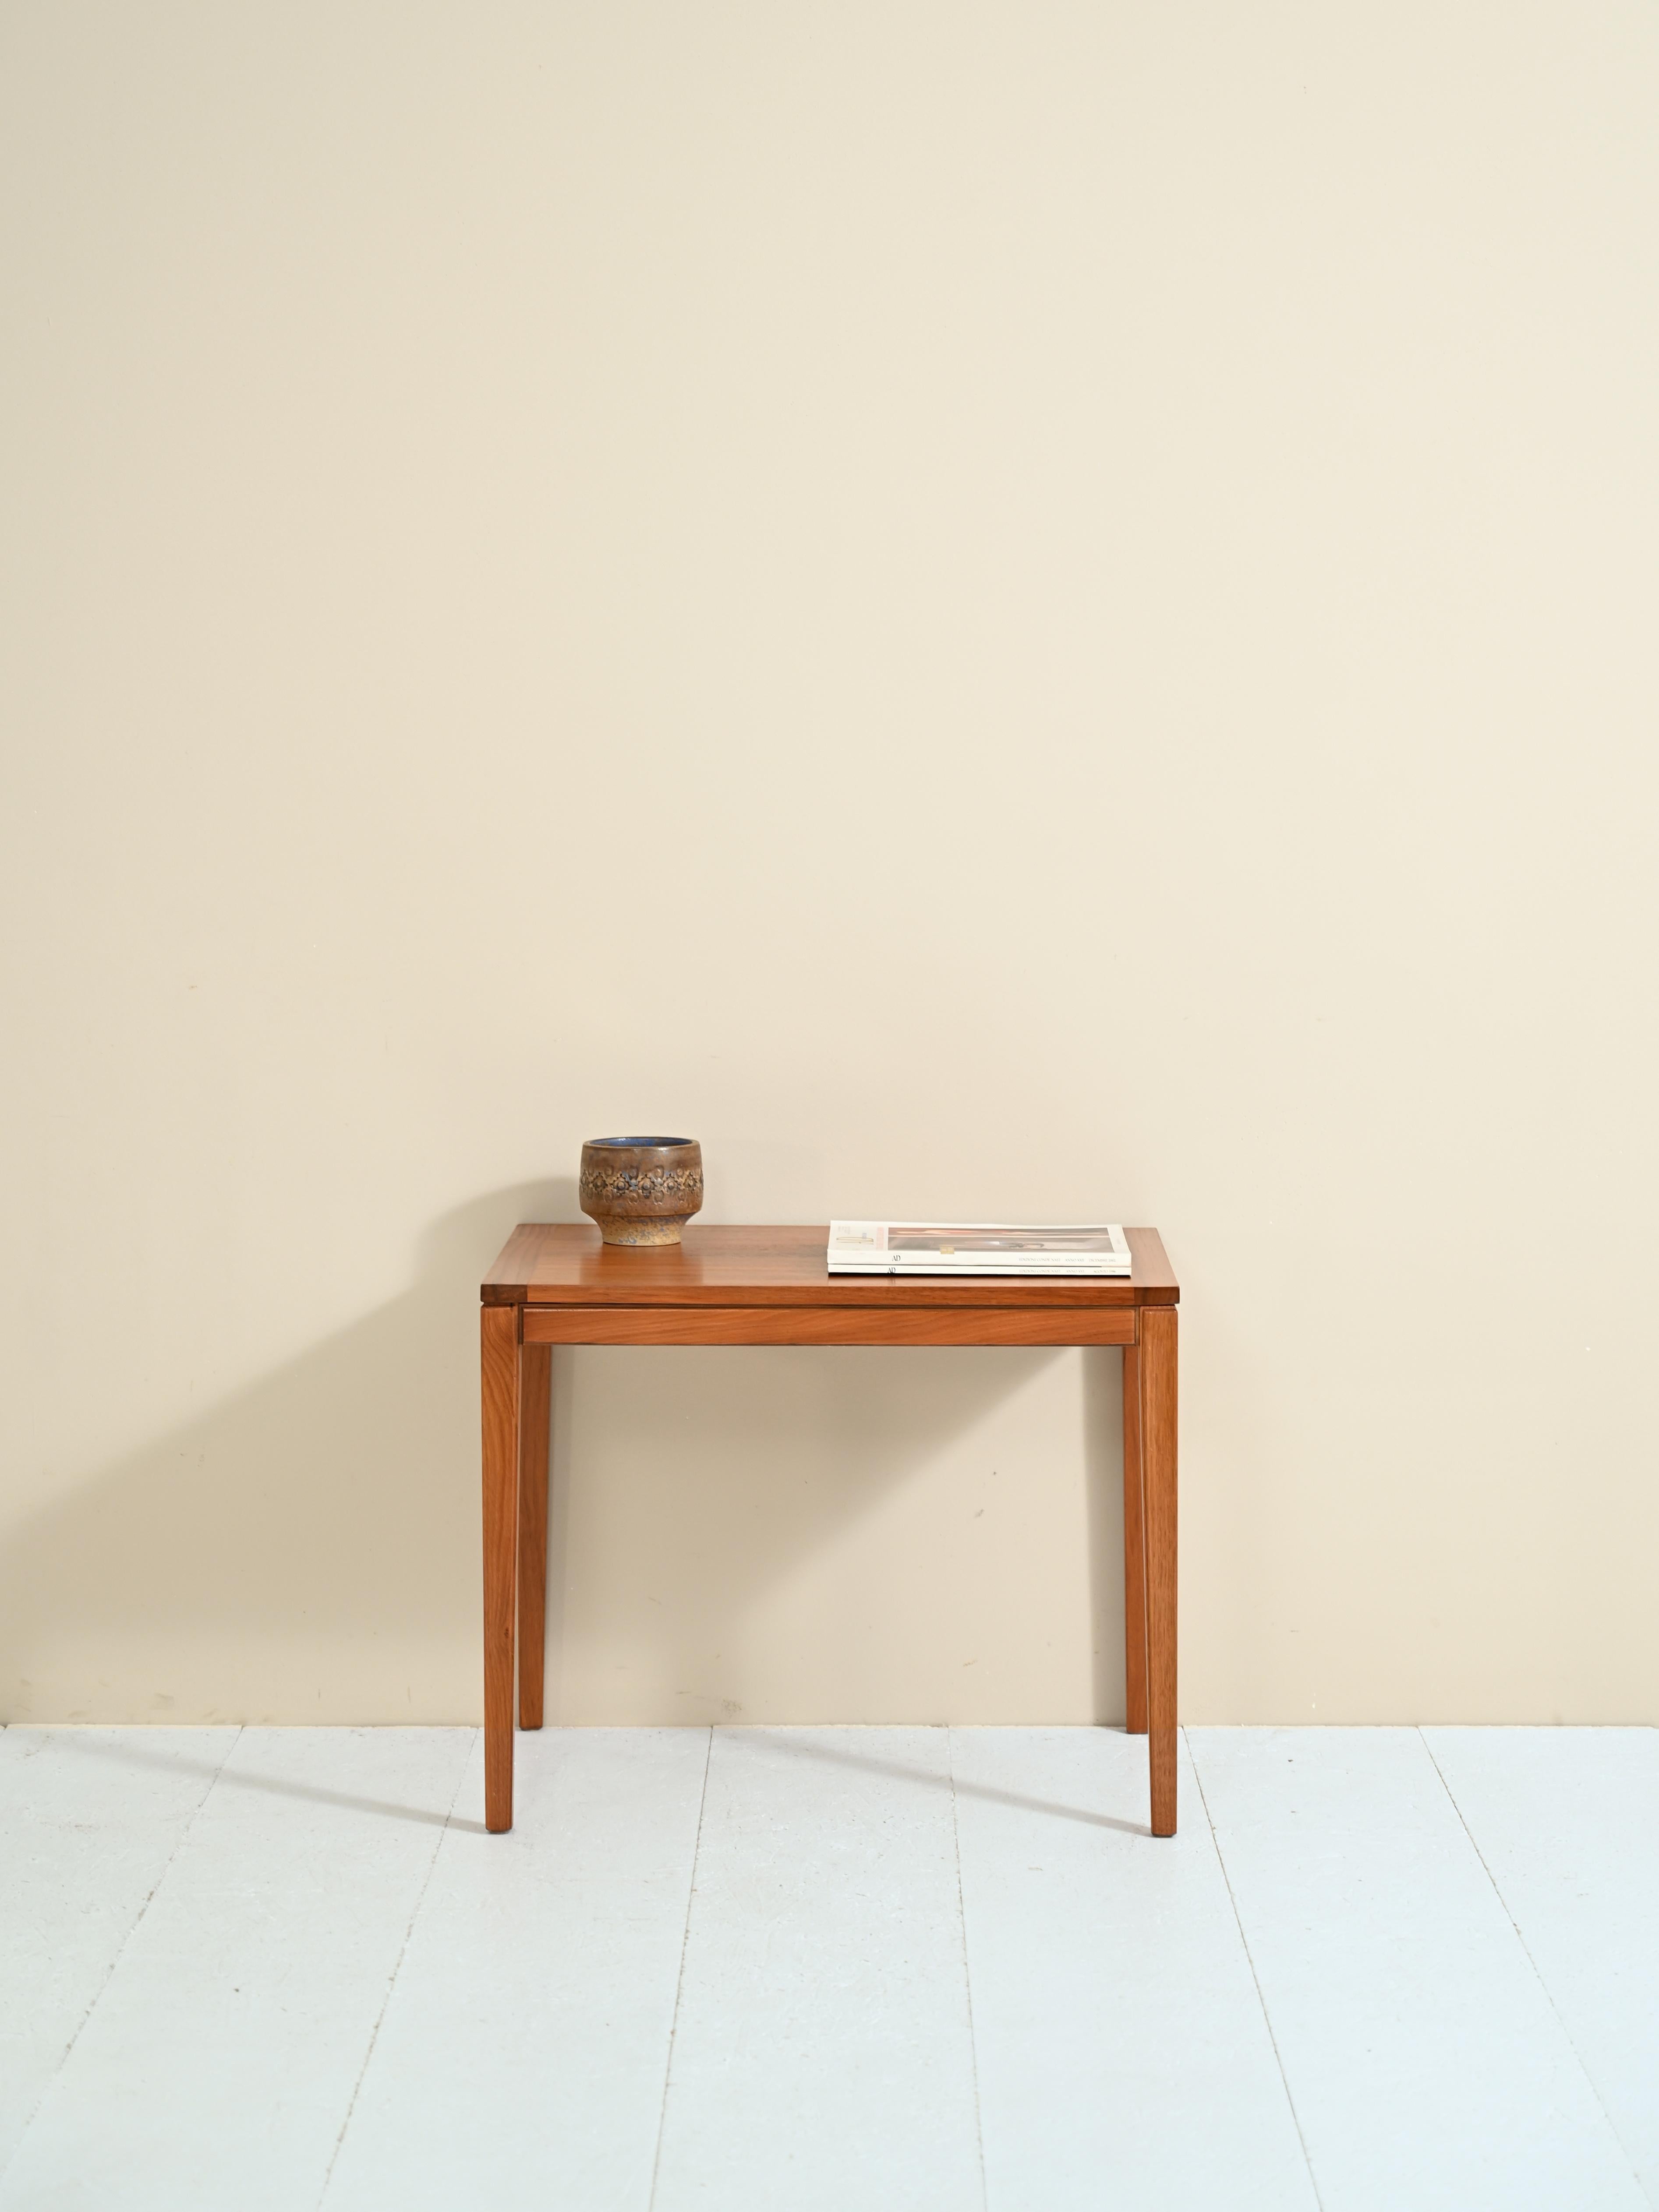 Coffee table of Scandinavian manufacture. The coffee table is made of teak wood and was manufactured at the turn of the 1950s/60s.

Simplicity in form and attention to detail are the characteristics of this beautiful teak wood coffee